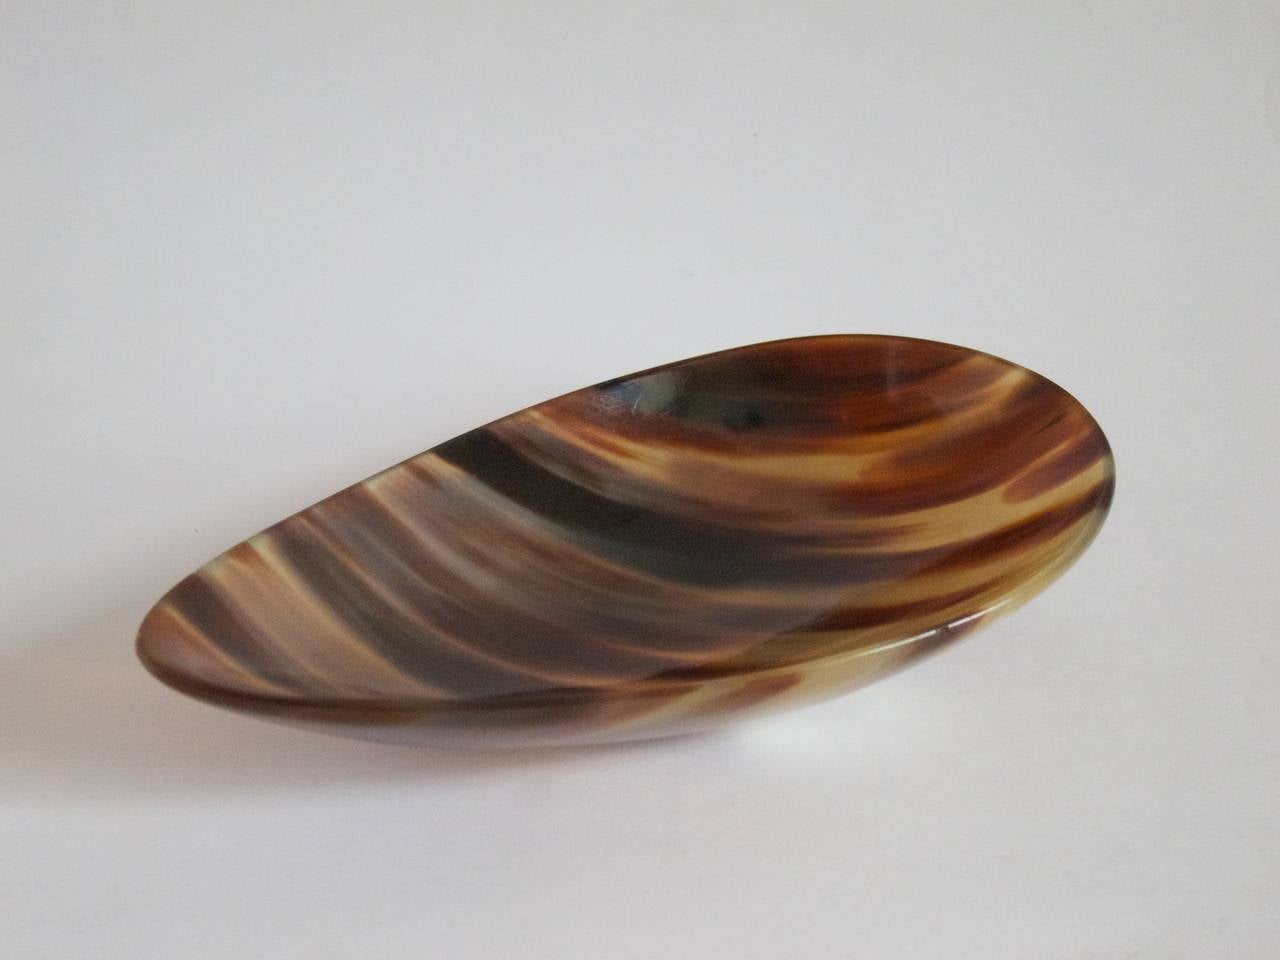 Horn Bowl by C. Auboeck
beautiful tiger fur like patterns